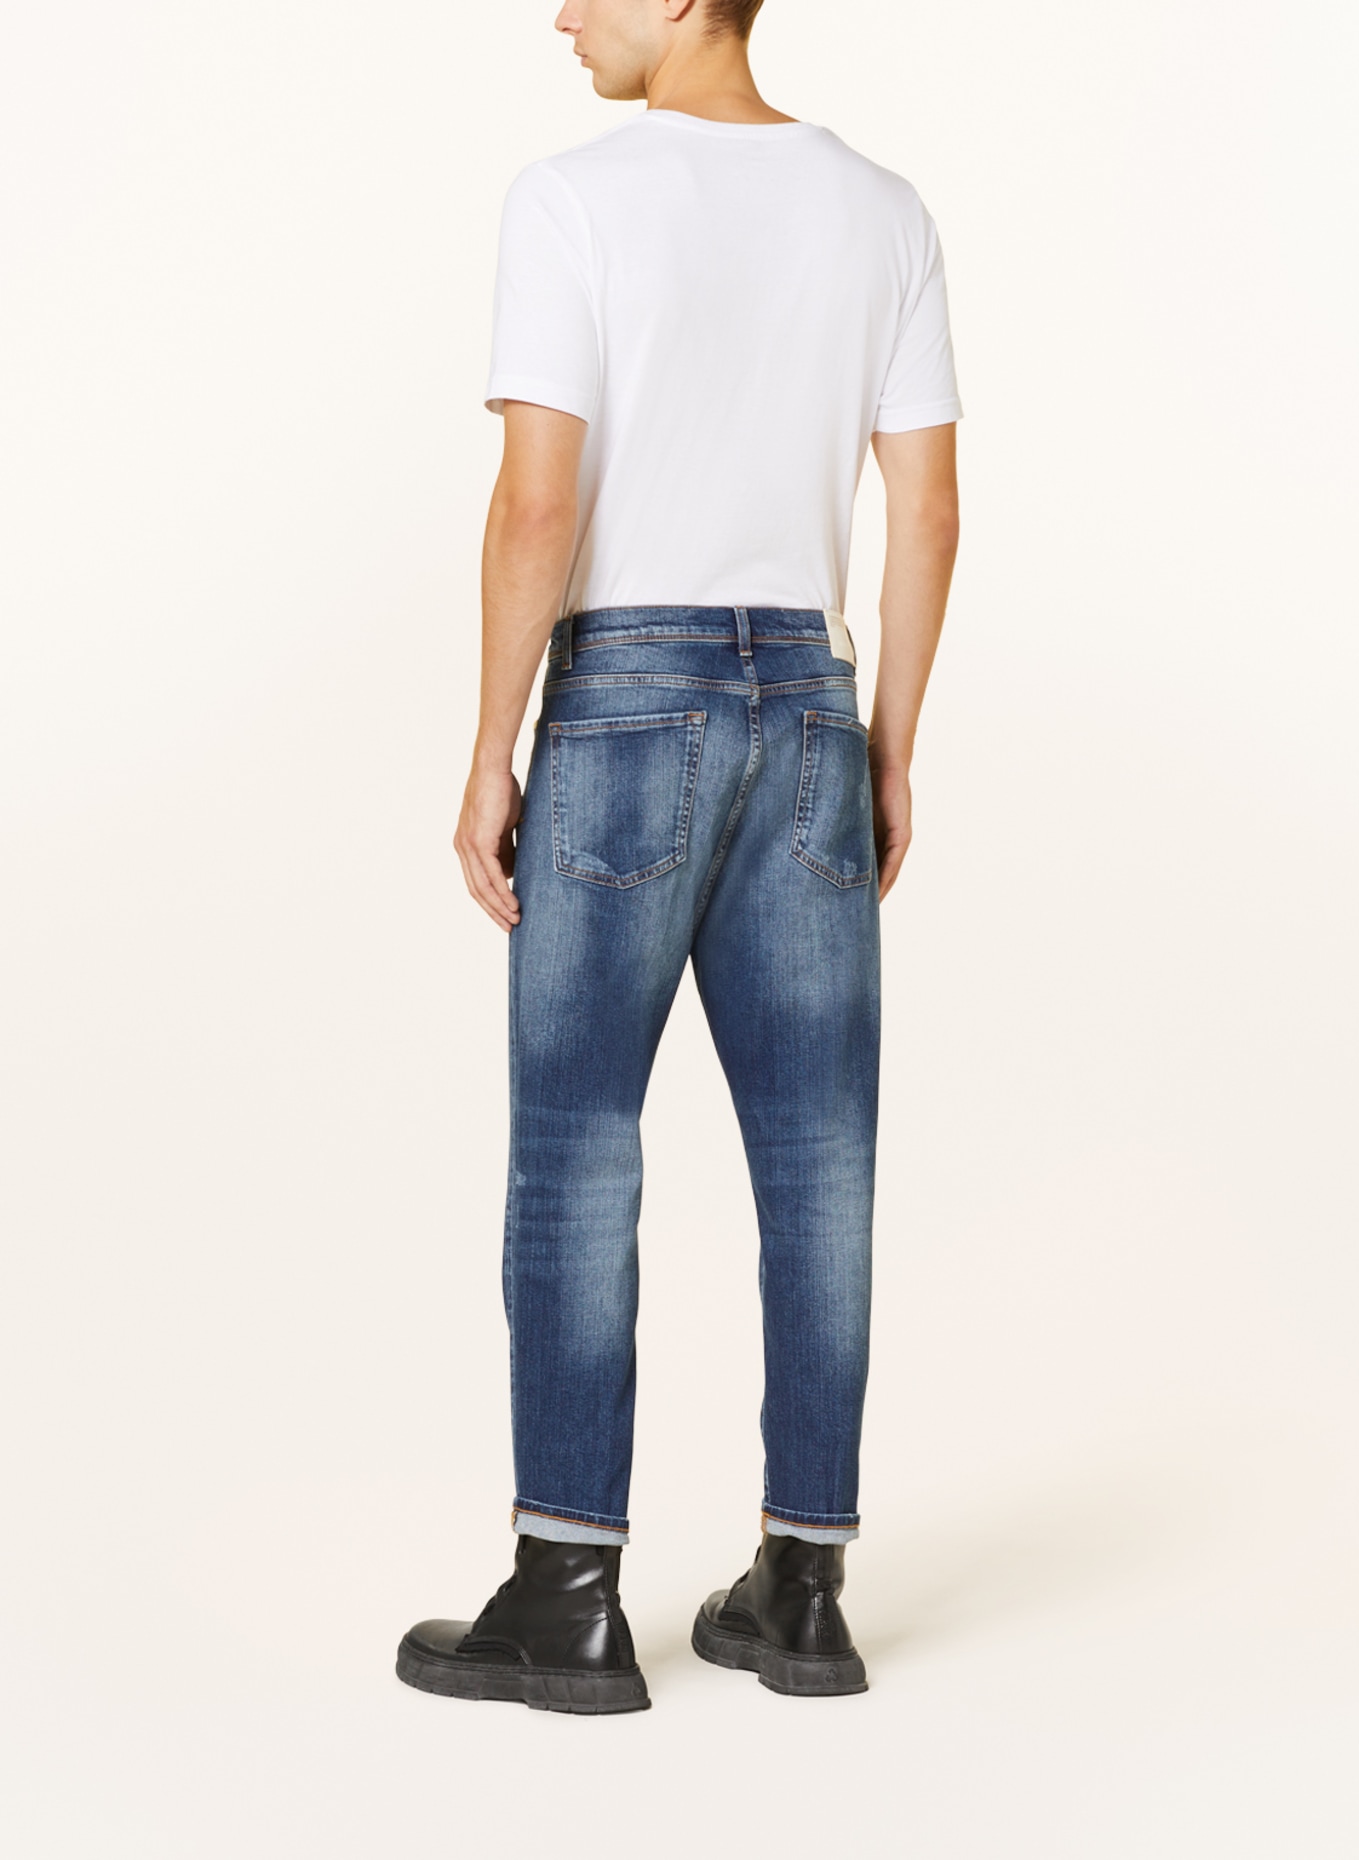 GOLDGARN DENIM Jeans RHEINAU relaxed cropped fit with cropped leg length, Color: 1090 MID BLUE (Image 3)